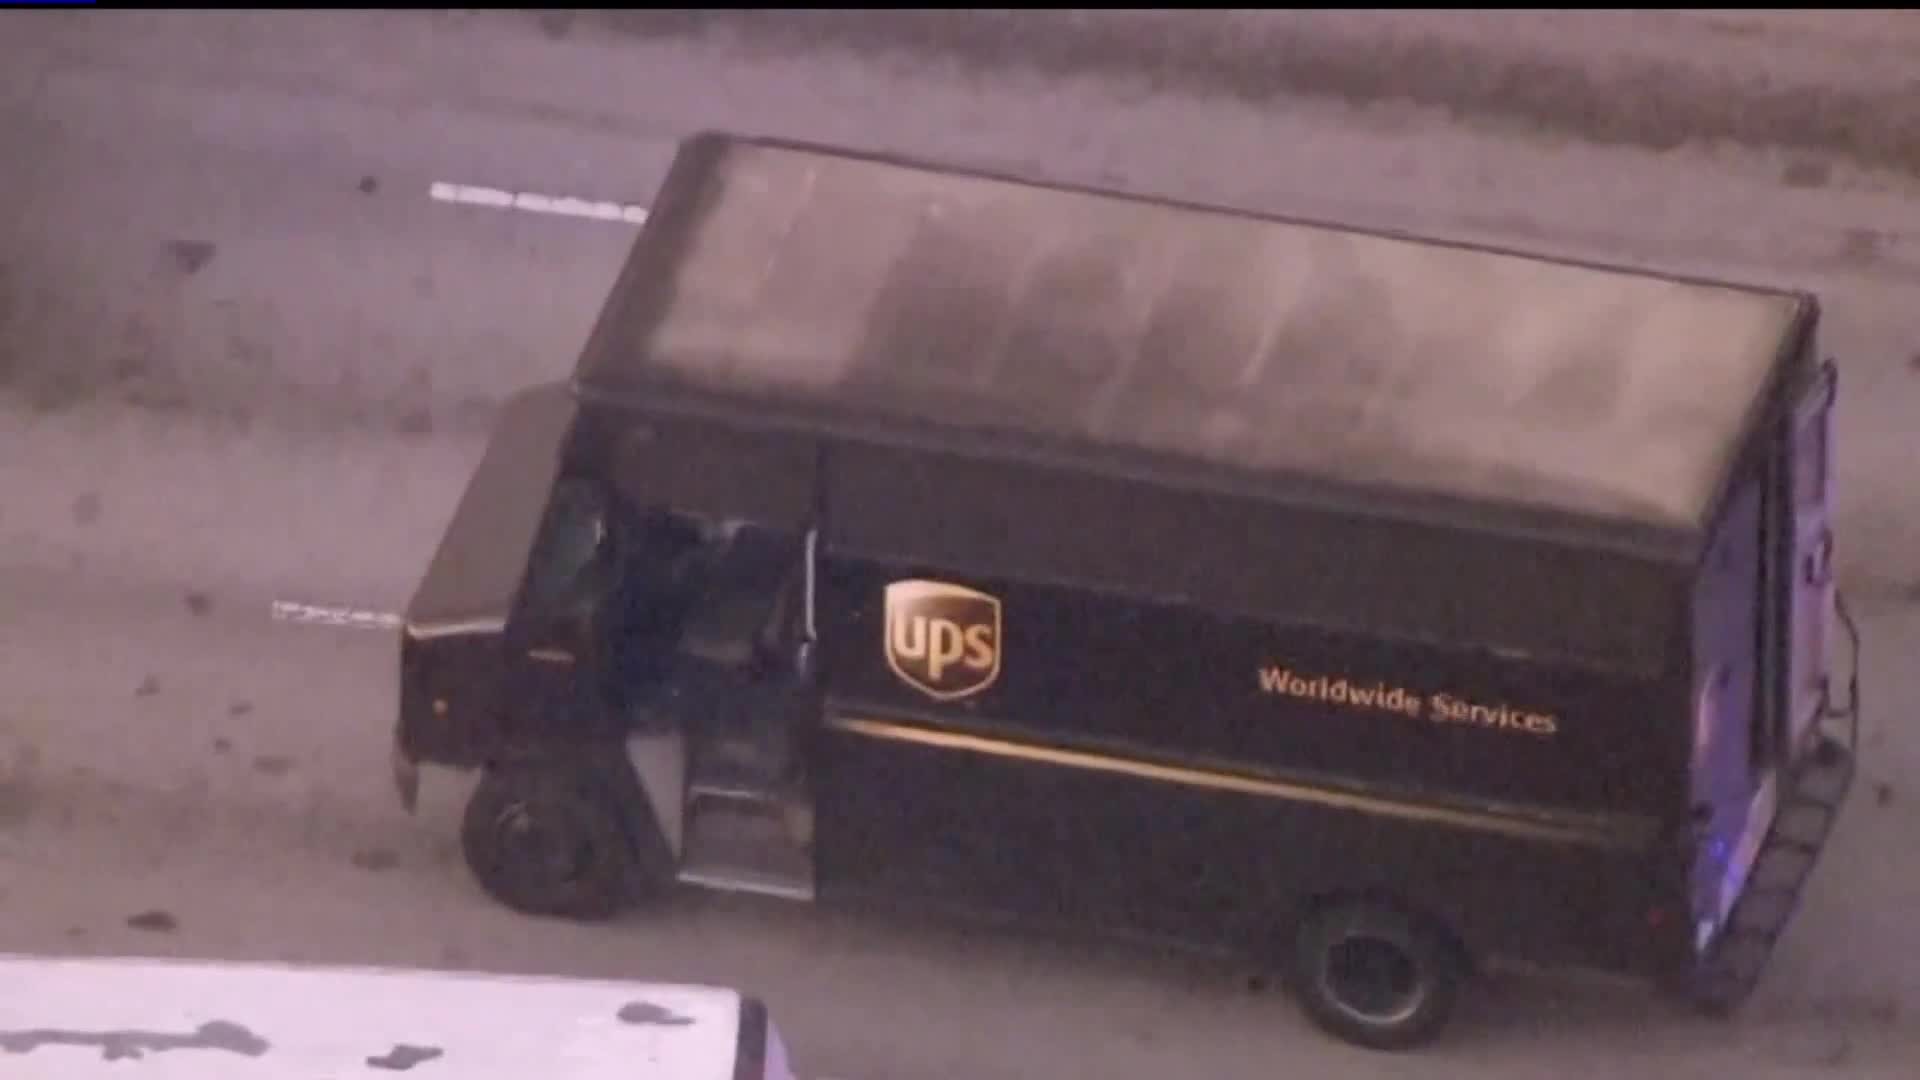 Chase with stolen UPS truck ends with shootout, 4 dead